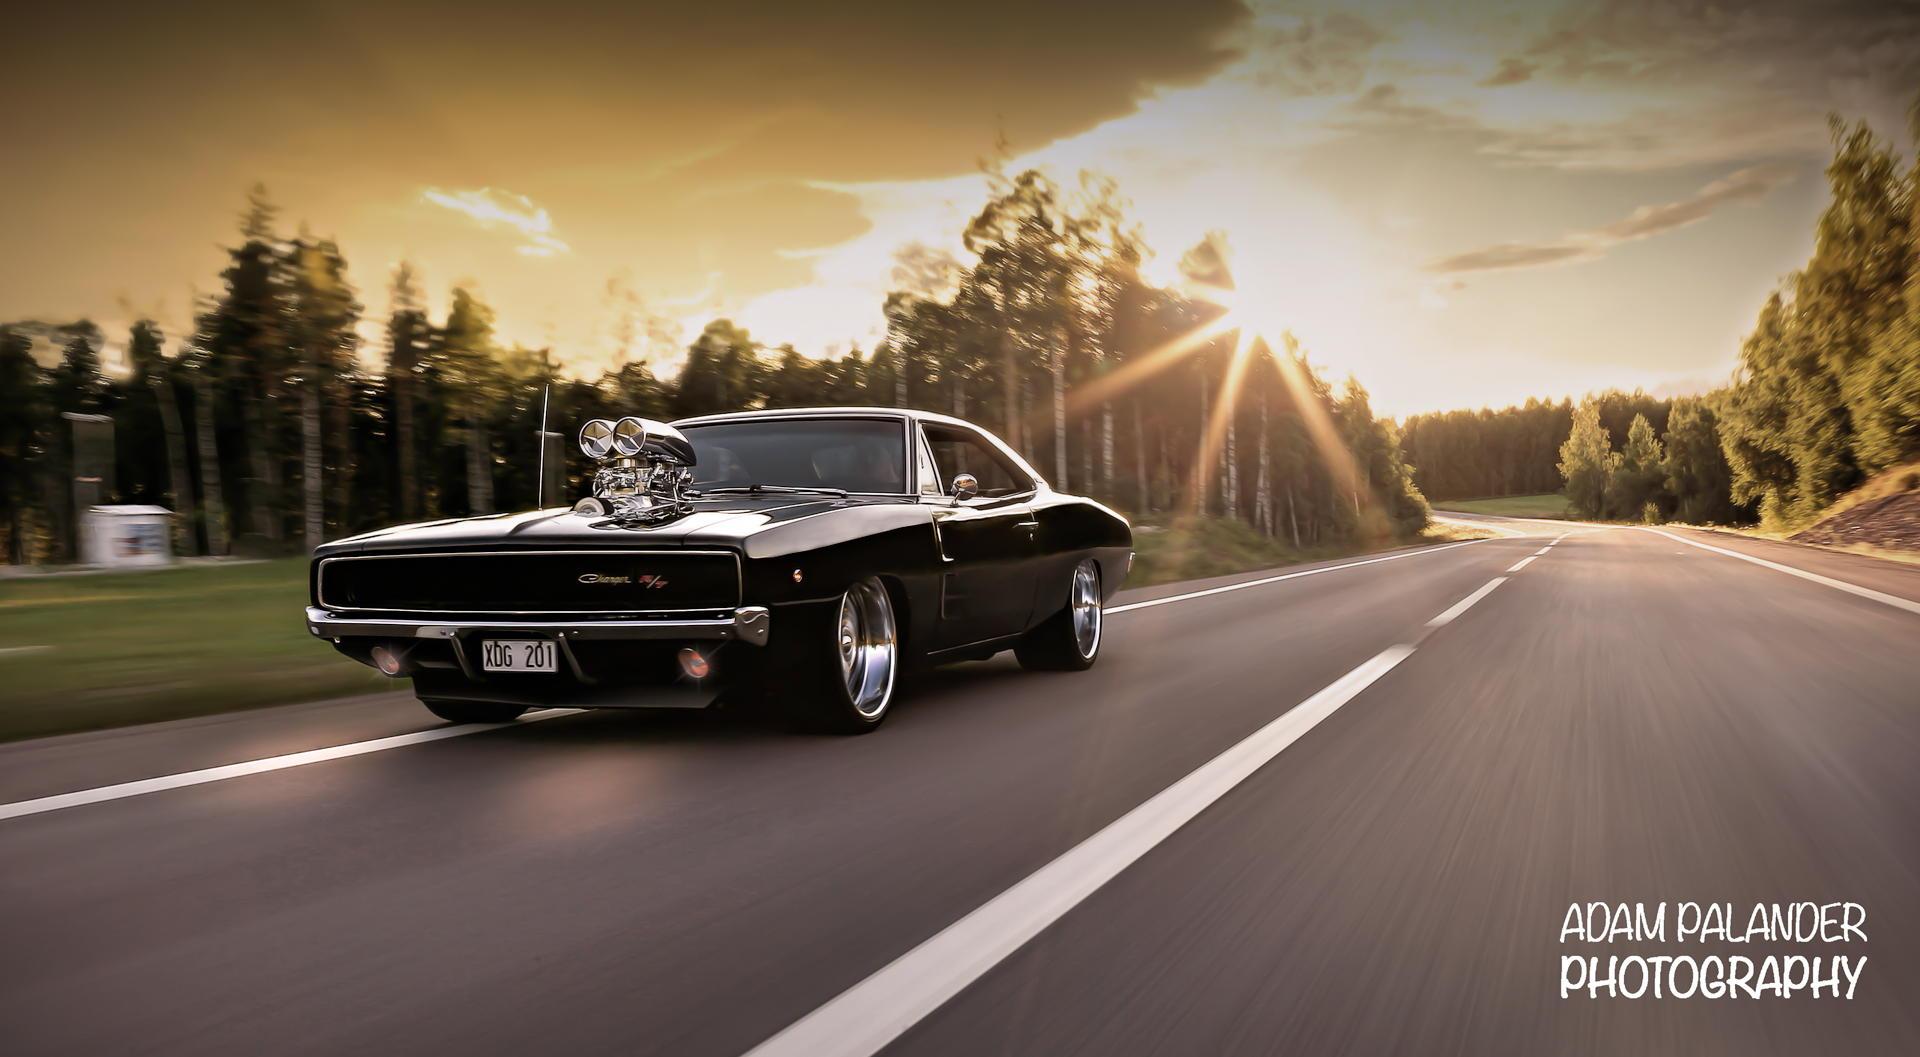 1968 Dodge Charger Sports Cars Photo 37851678 Fanpop - Dodge Charger 1970 Hd - HD Wallpaper 